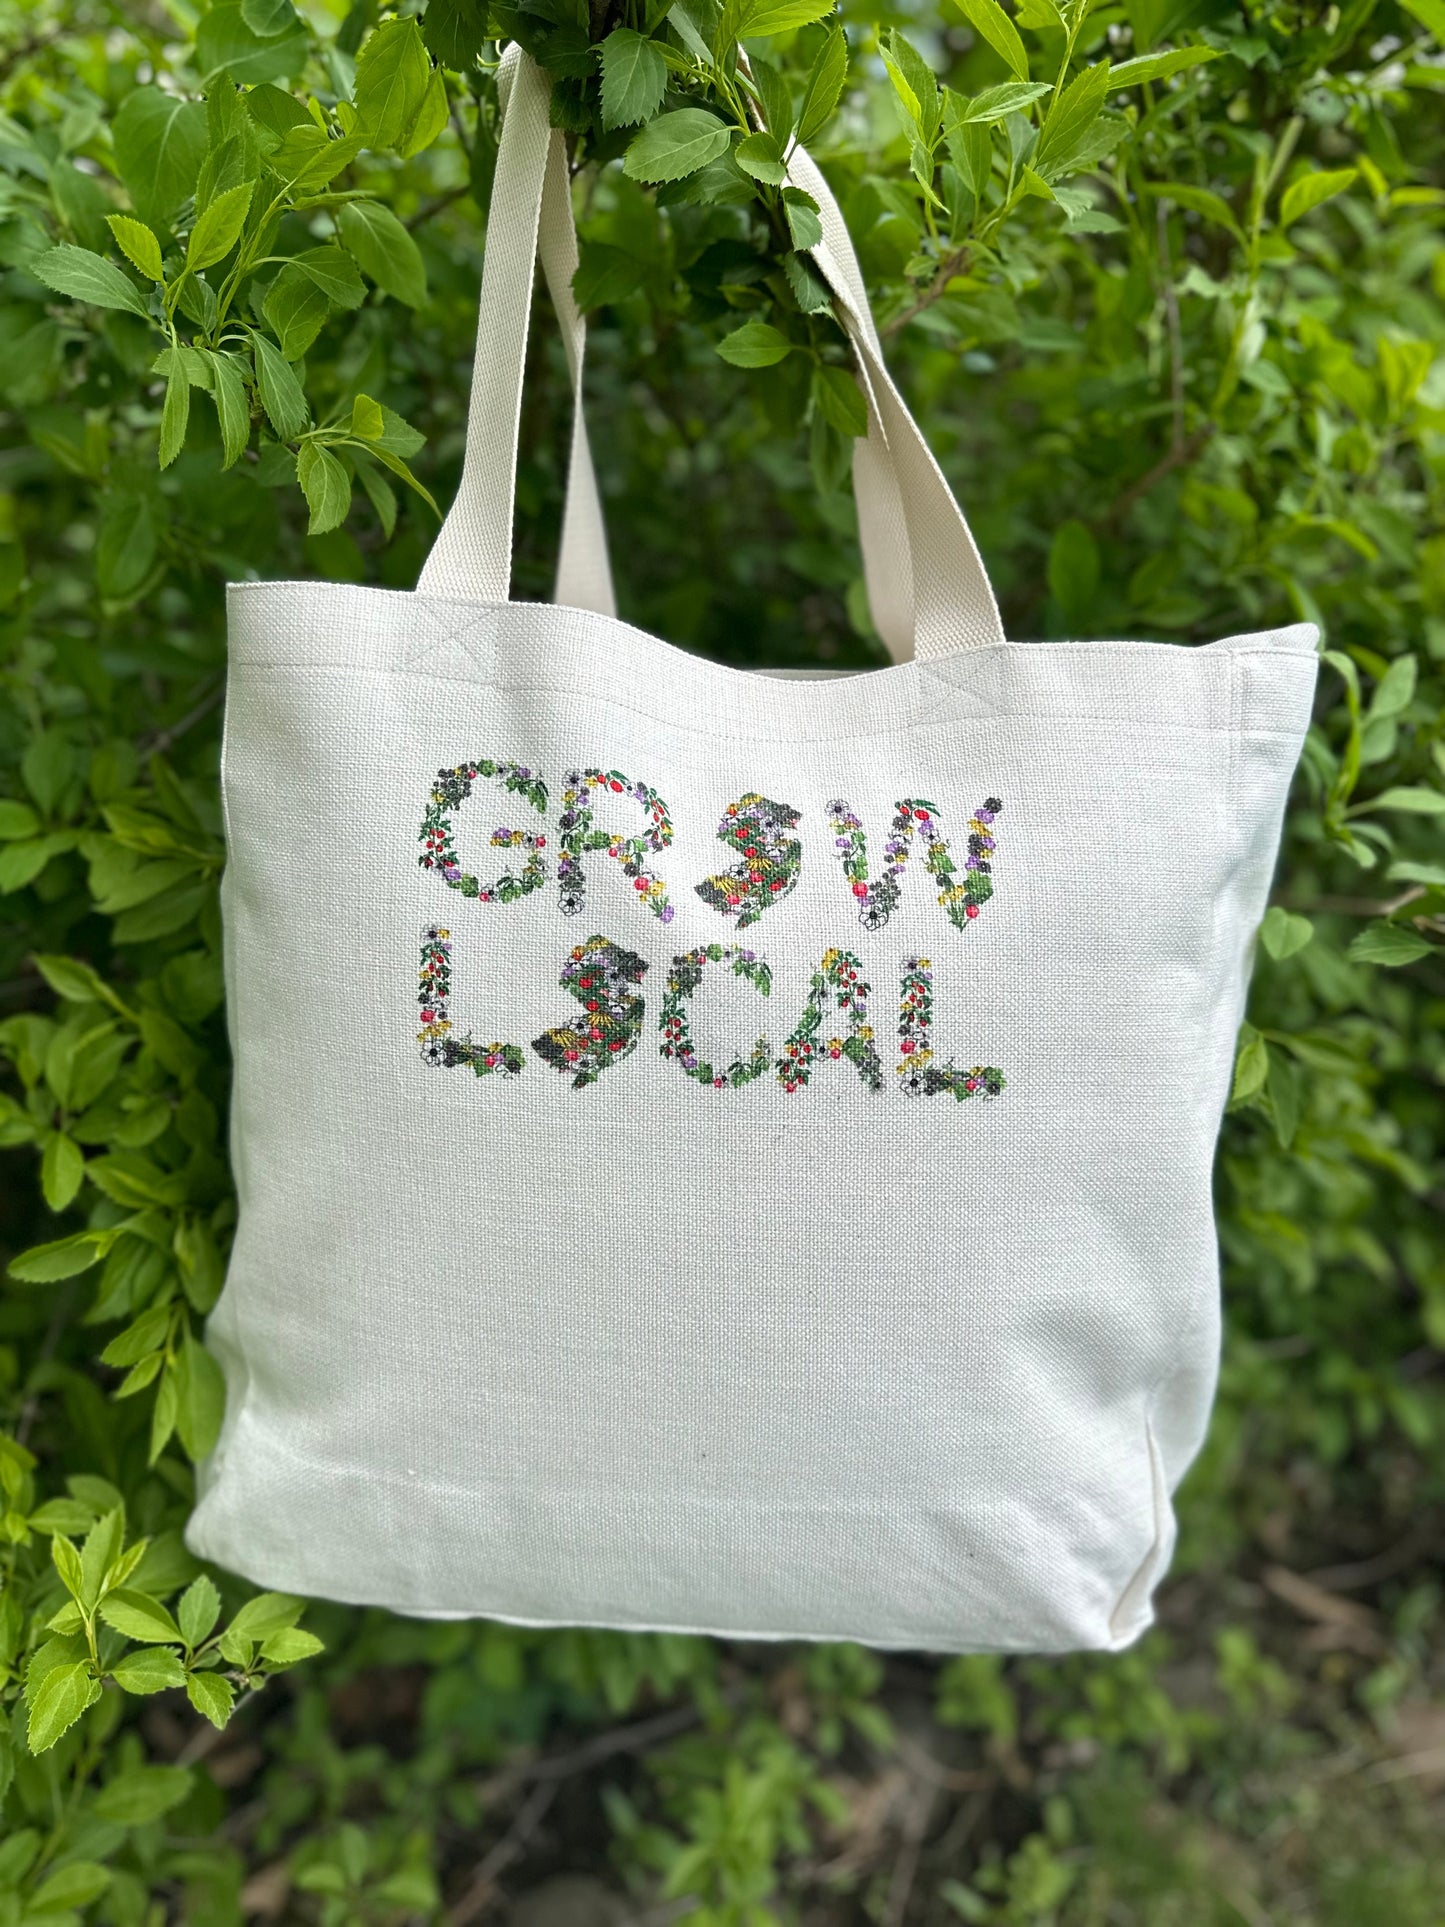 Garden State Grow Local Tote